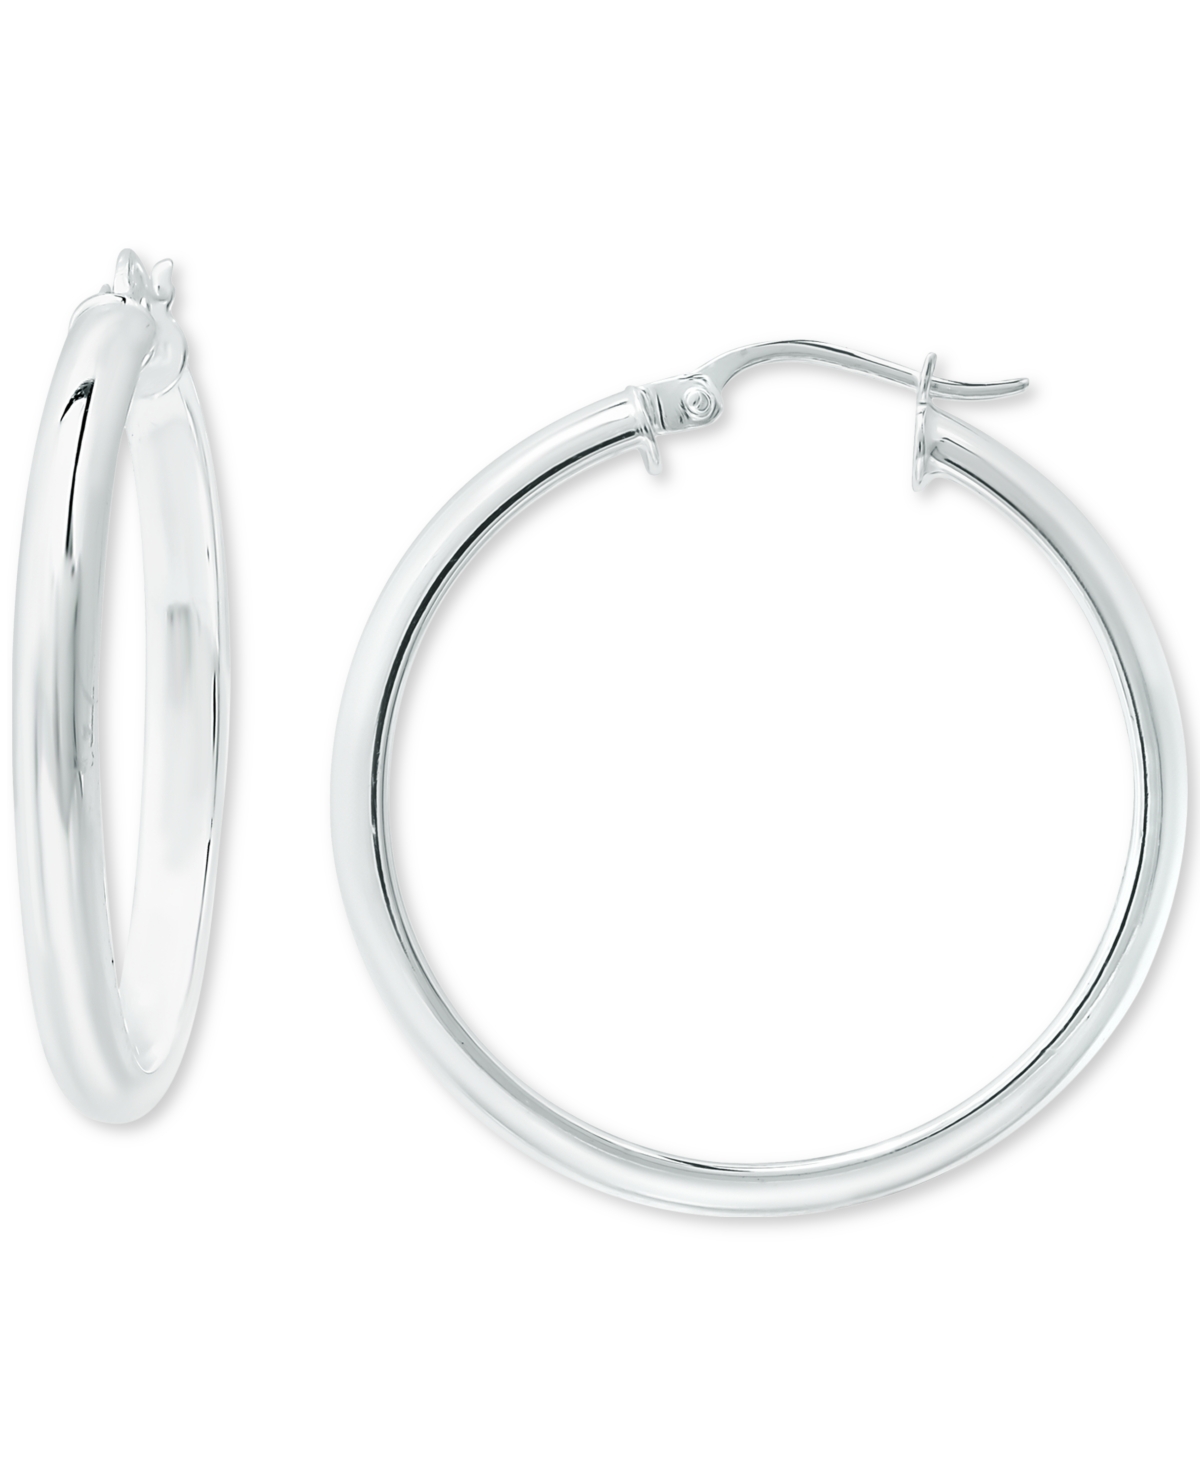 Giani Bernini Sterling Silver Round Polished Hoop Earrings in Sterling Silver, 3/4", Created for Macy's